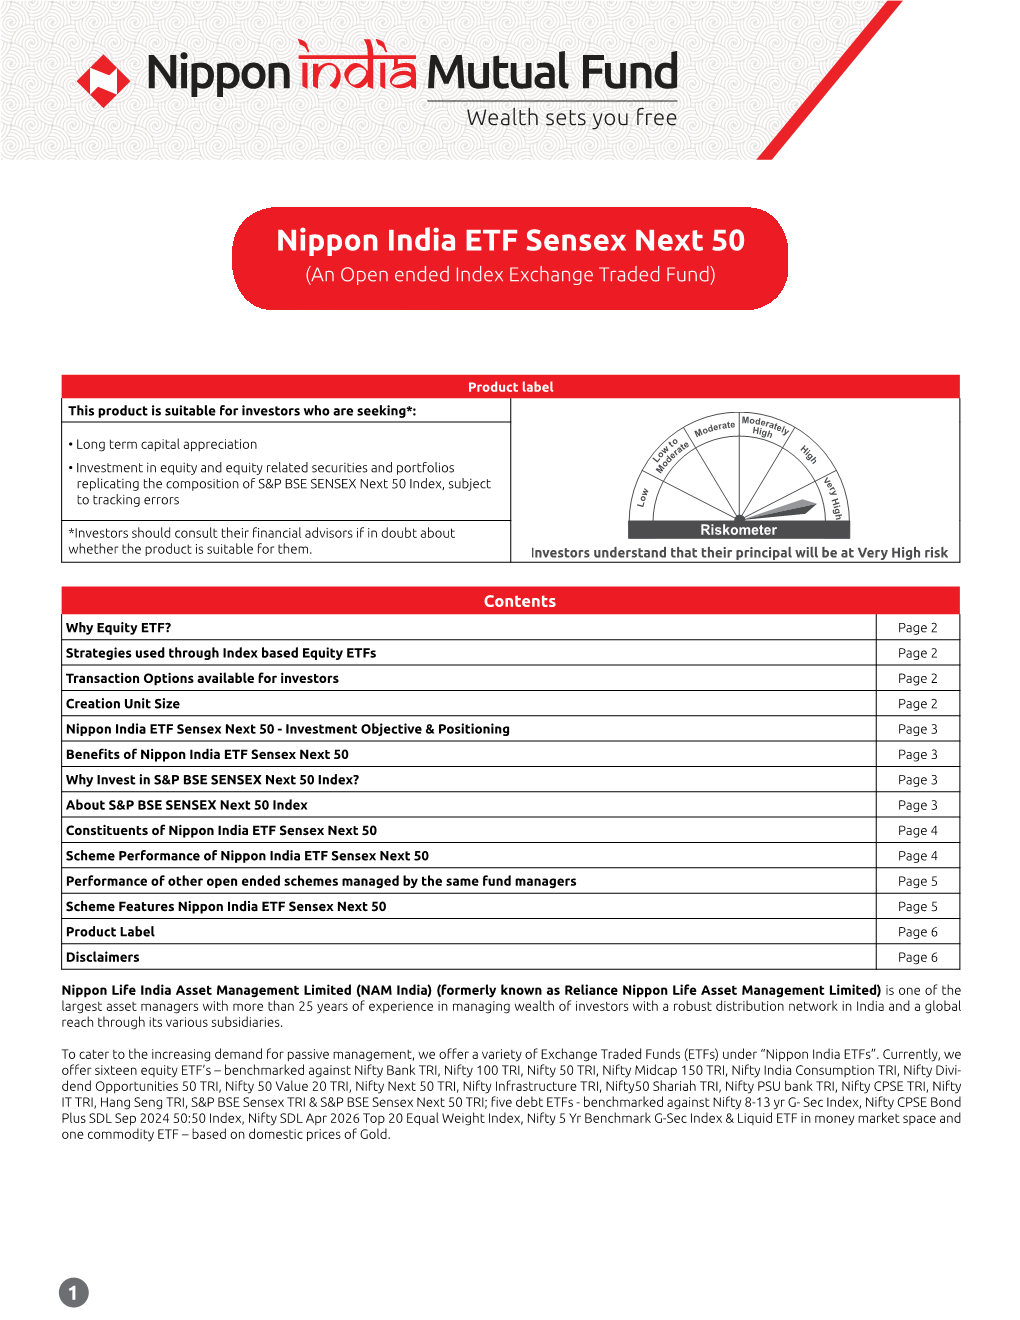 Nippon India ETF Sensex Next 50 (An Open Ended Index Exchange Traded Fund)